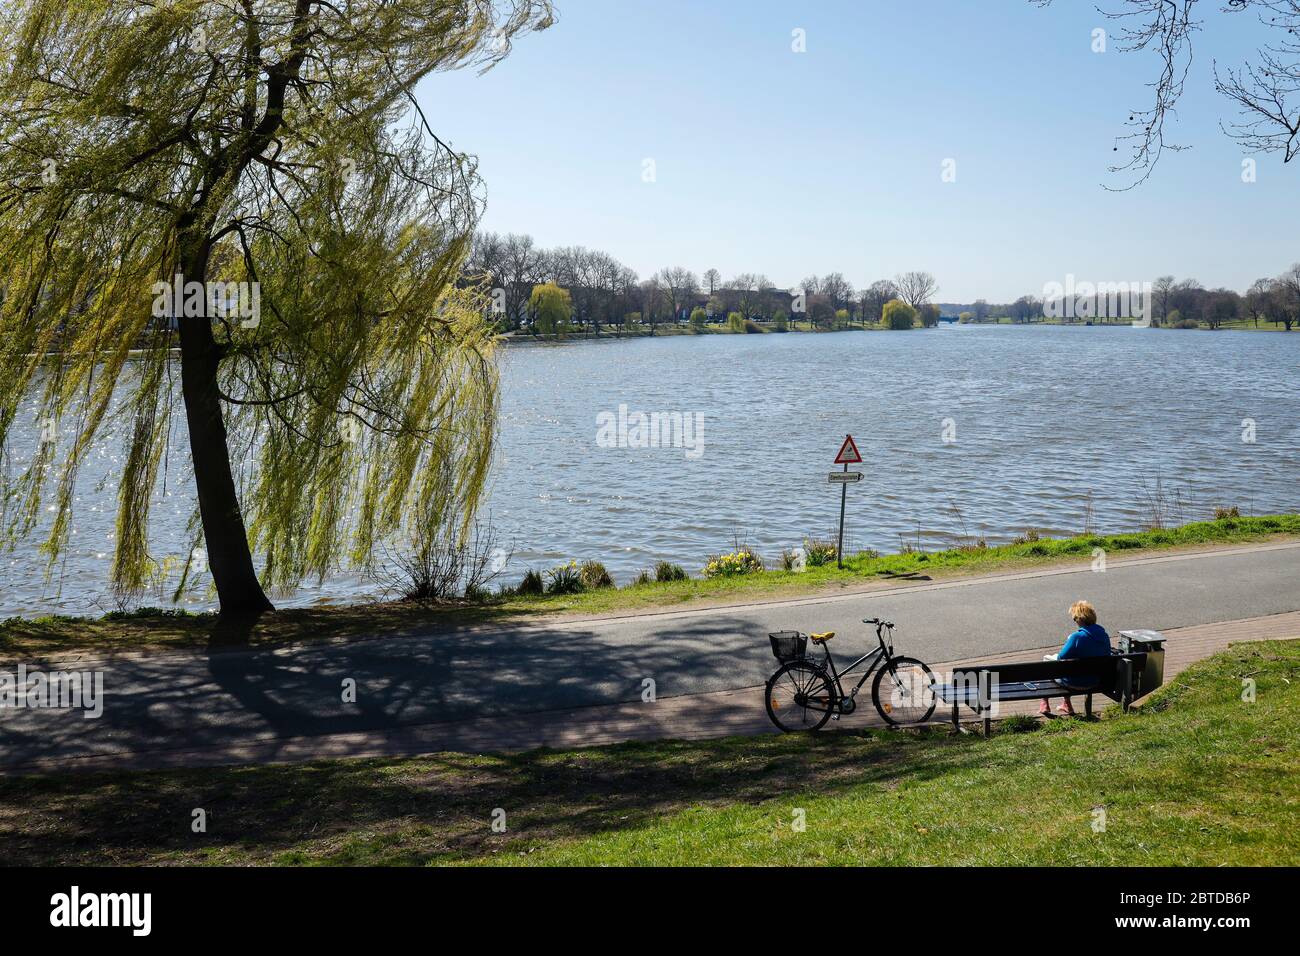 Muenster, North Rhine-Westphalia, Germany - Leisure time at Lake Aa during the corona crisis in compliance with the ban on contact. Muenster, Nordrhei Stock Photo